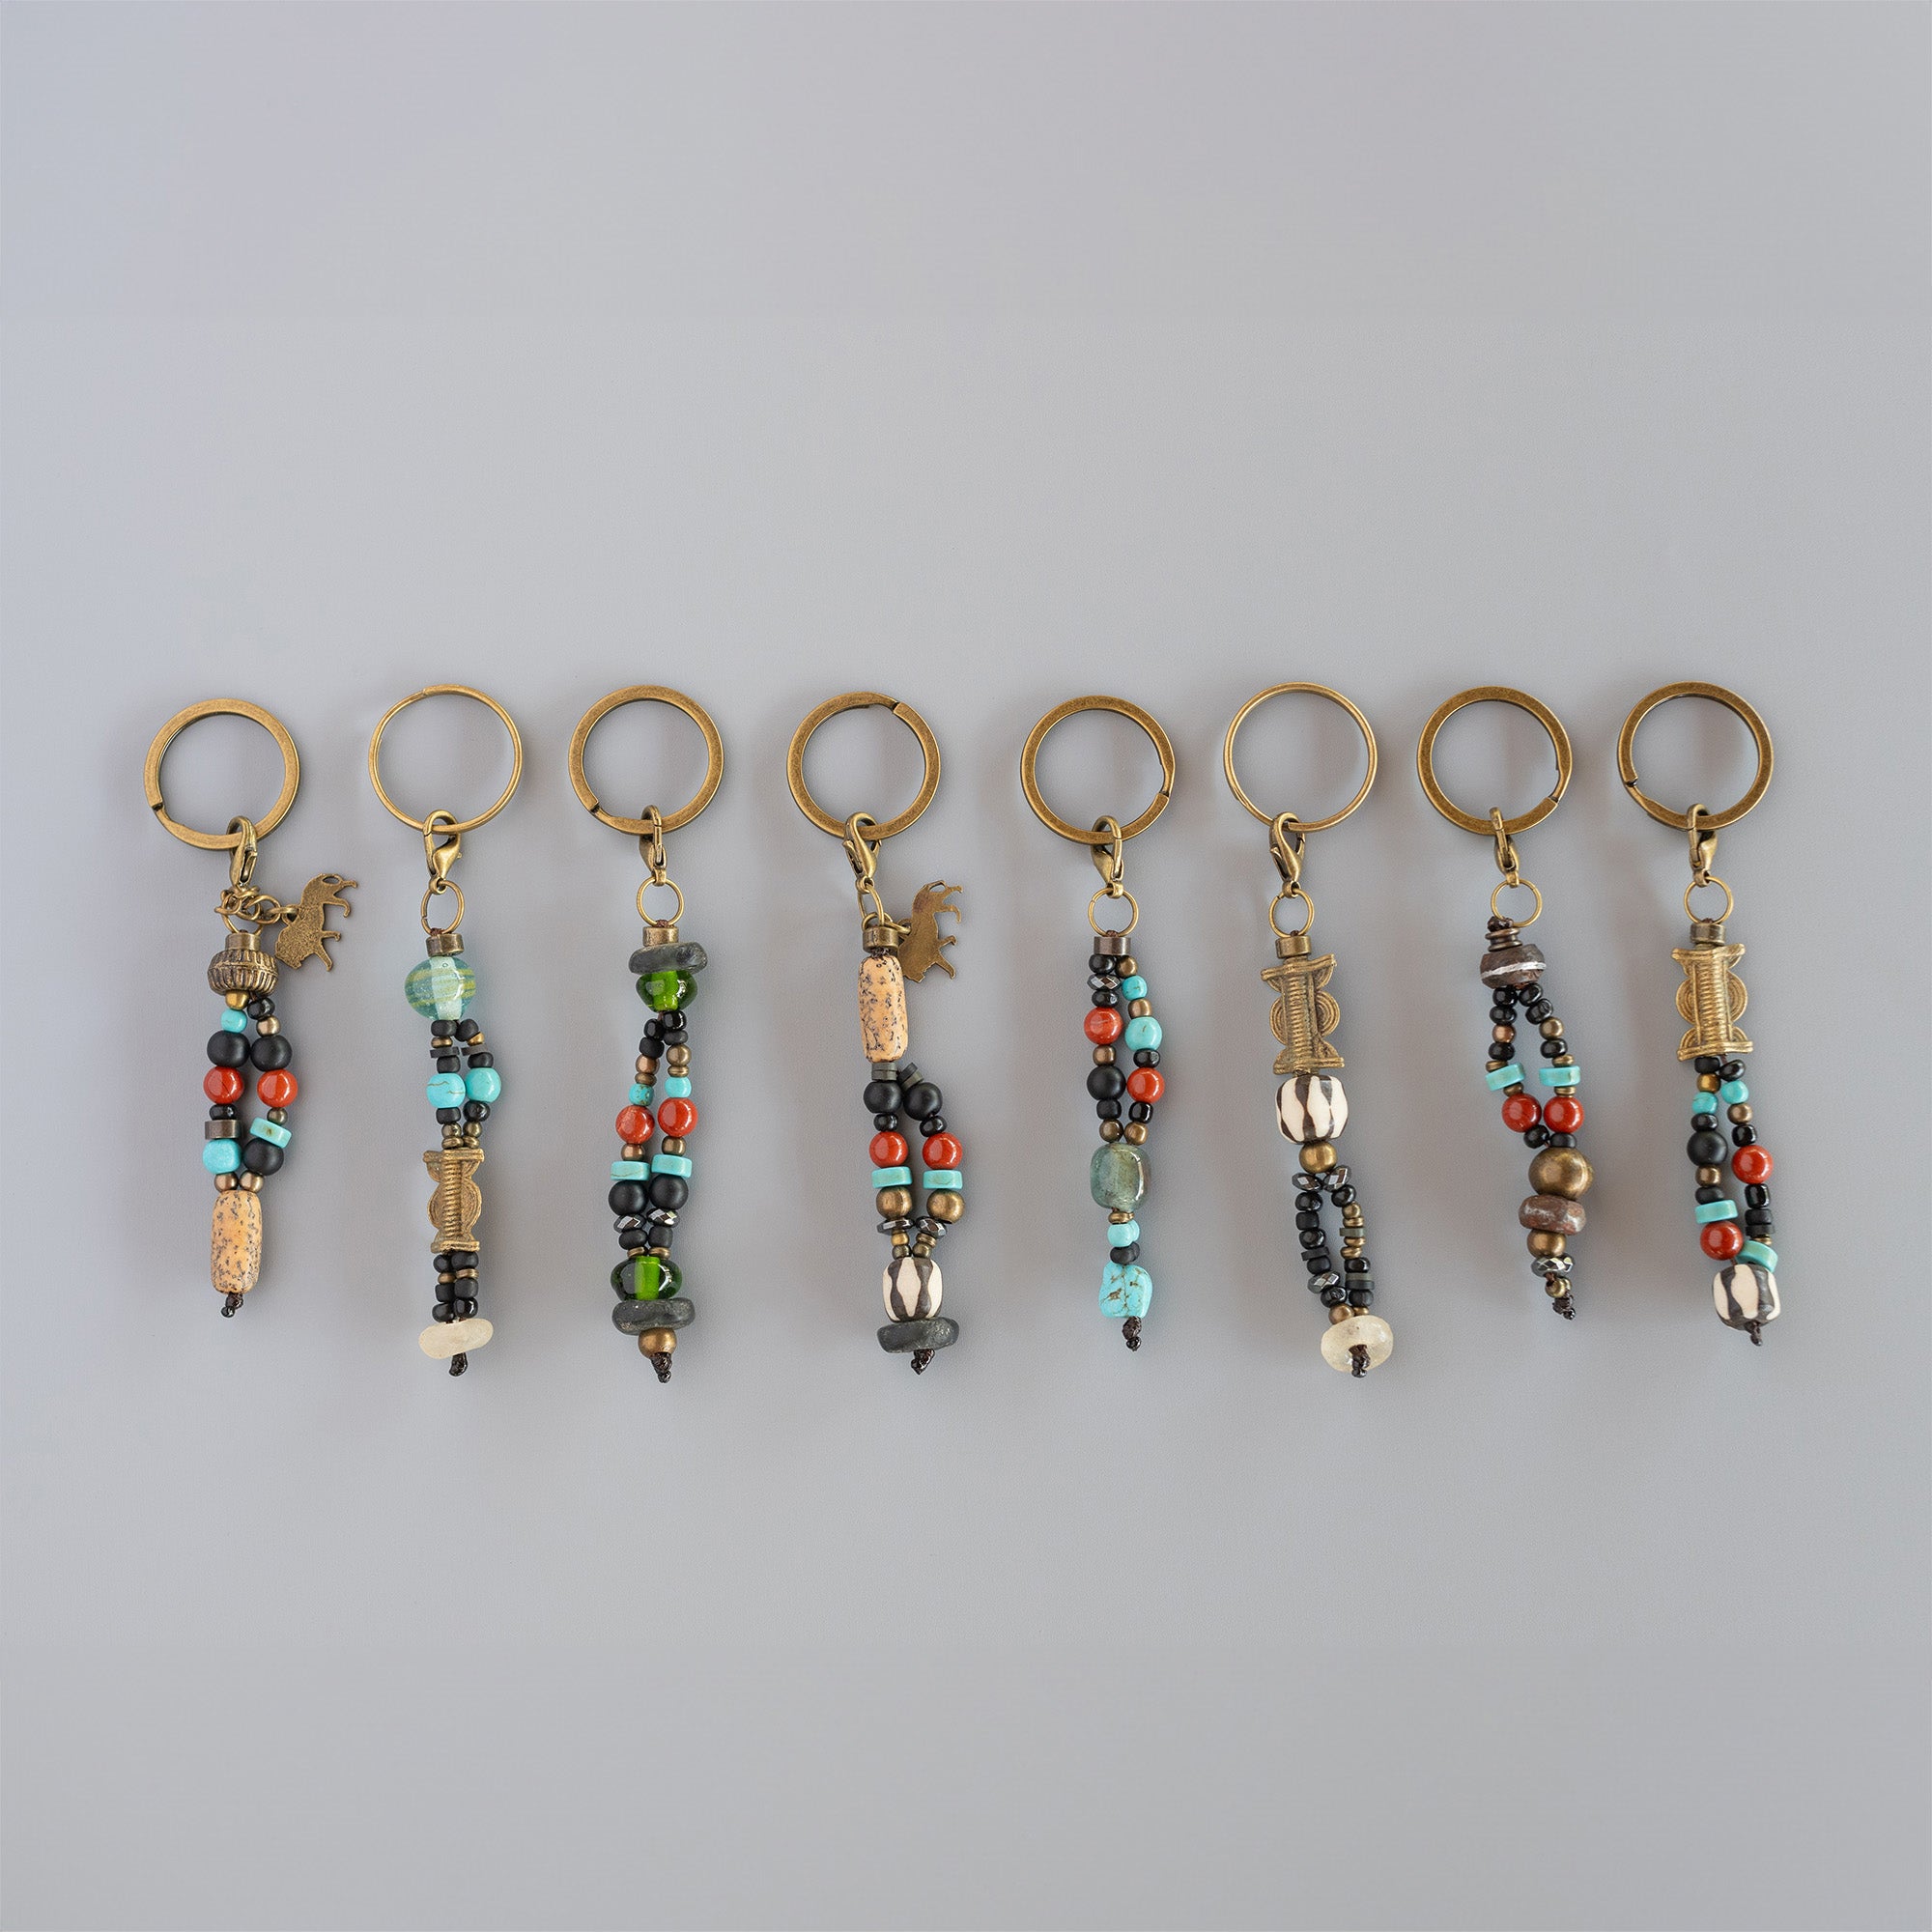 One-Of-A-Kind Keyrings